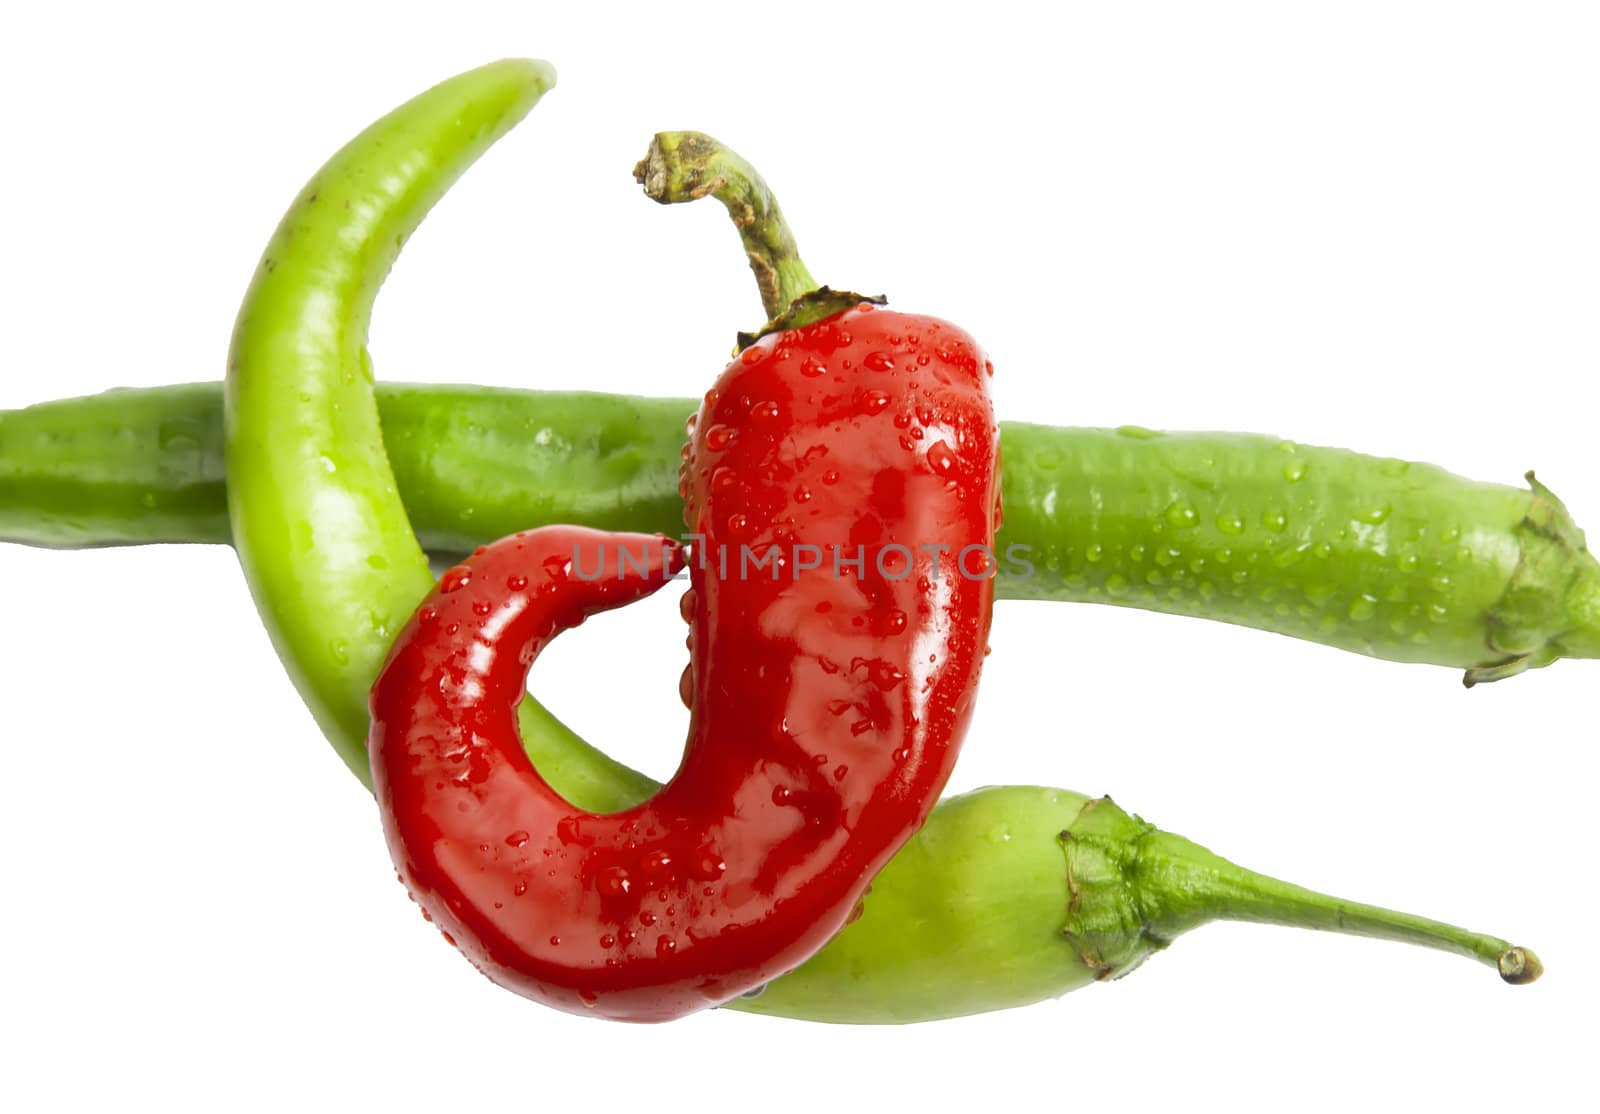 Straight green pepper and small red chili pepper by RawGroup